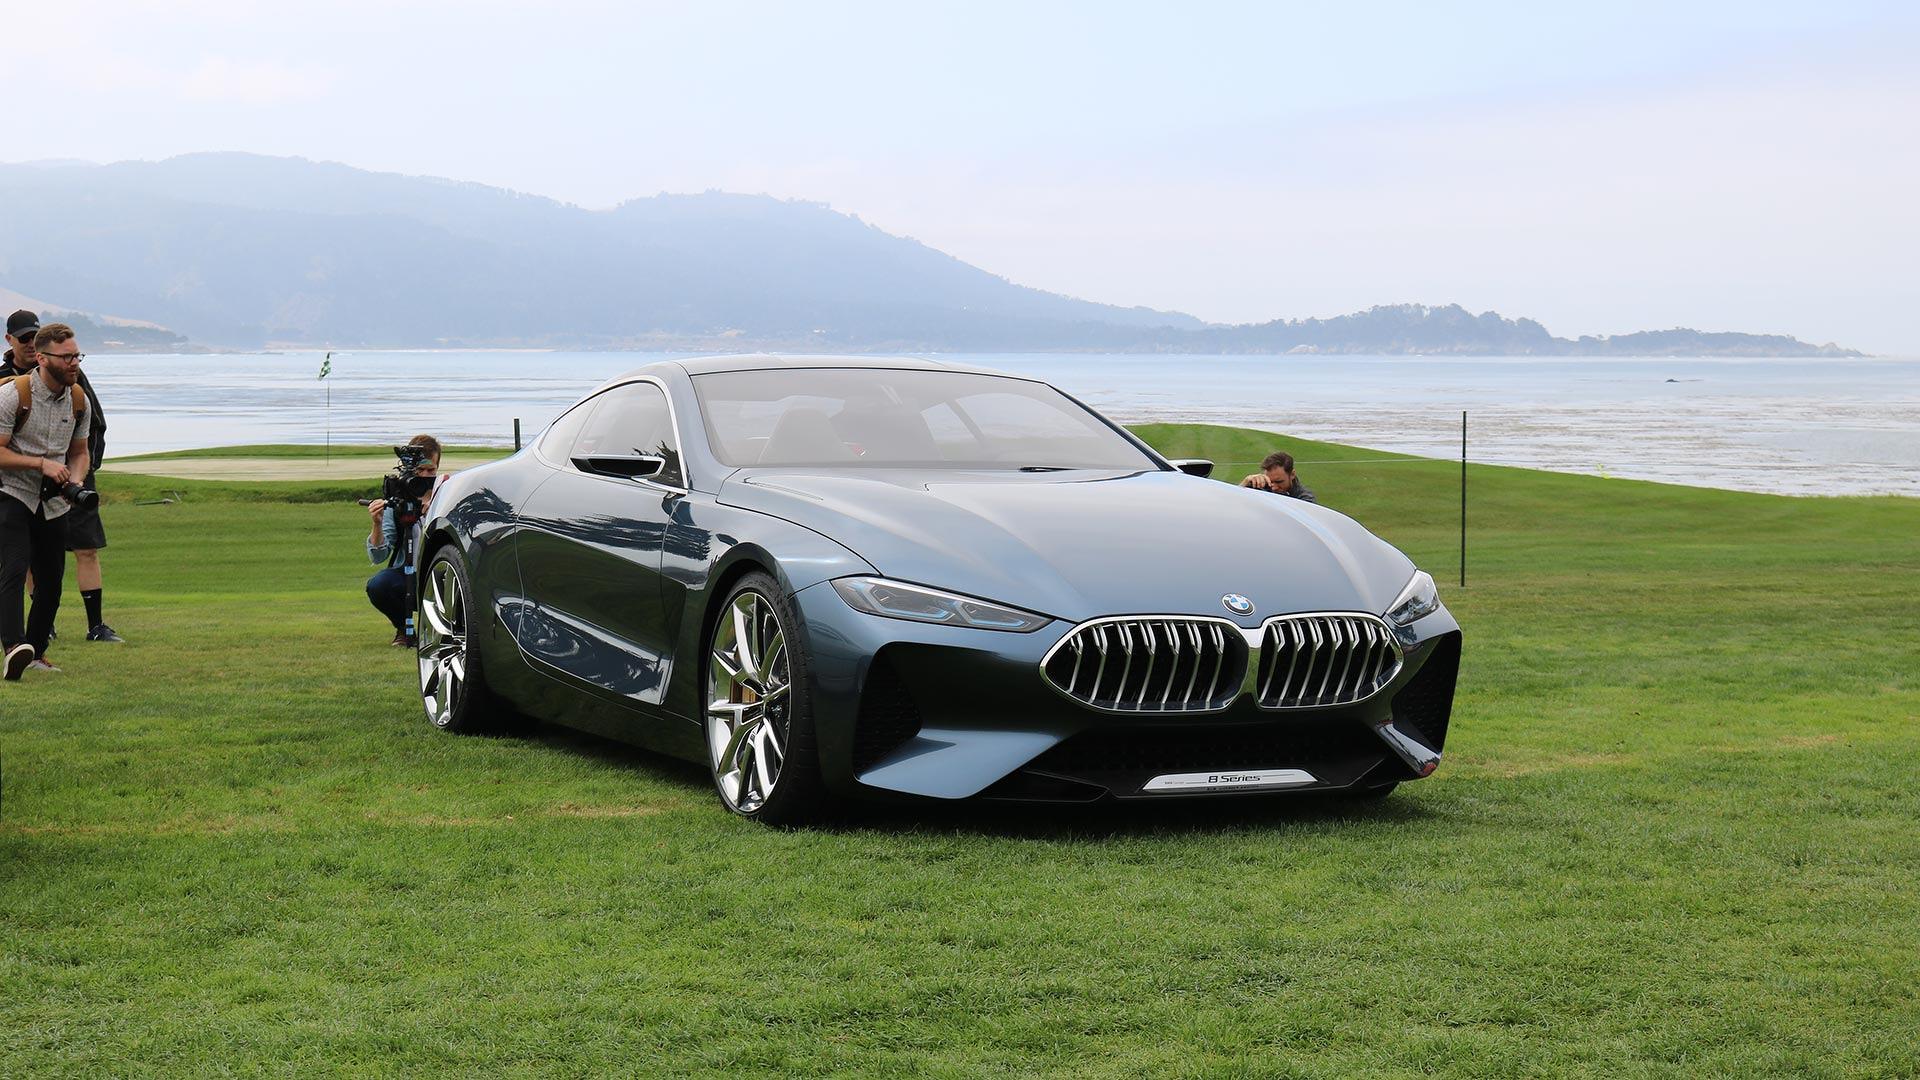 BMW 8 Series Concept Makes North American Debut At Pebble Beach